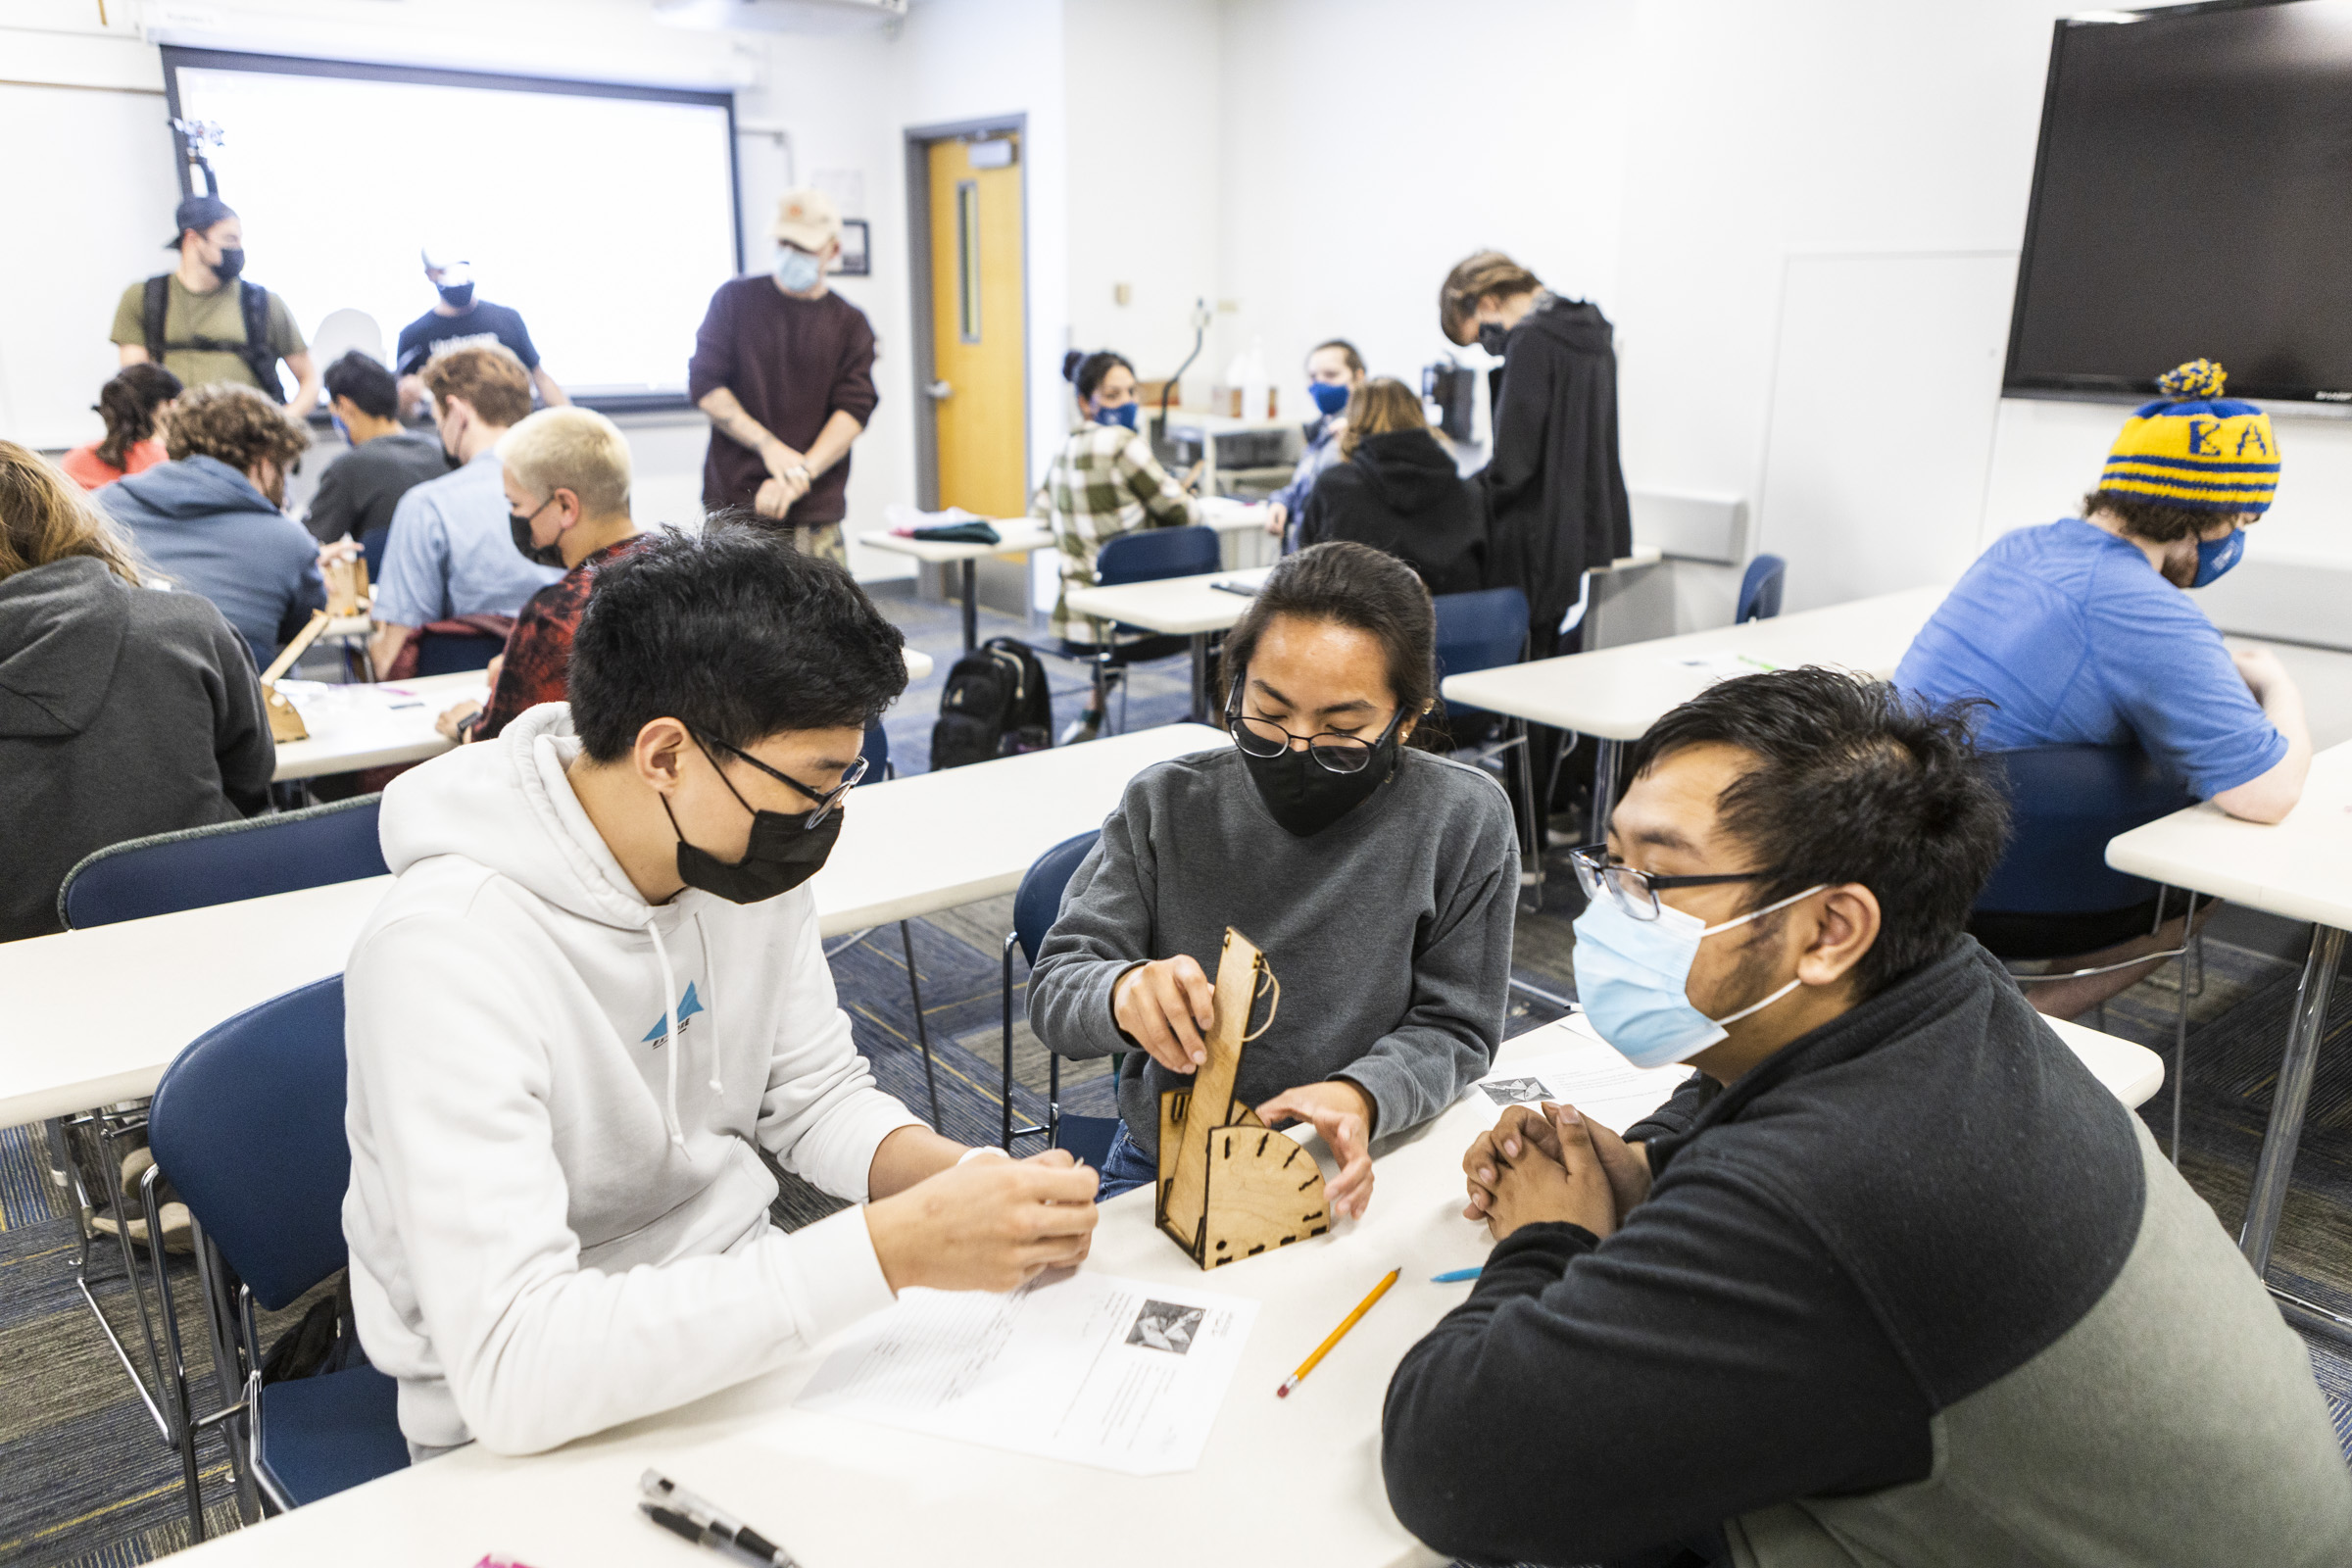 College of Engineering and Mines students build a catapult during an Introduction to Engineering class at the Duckering Building in September 2021. UAF photo by JR Ancheta.